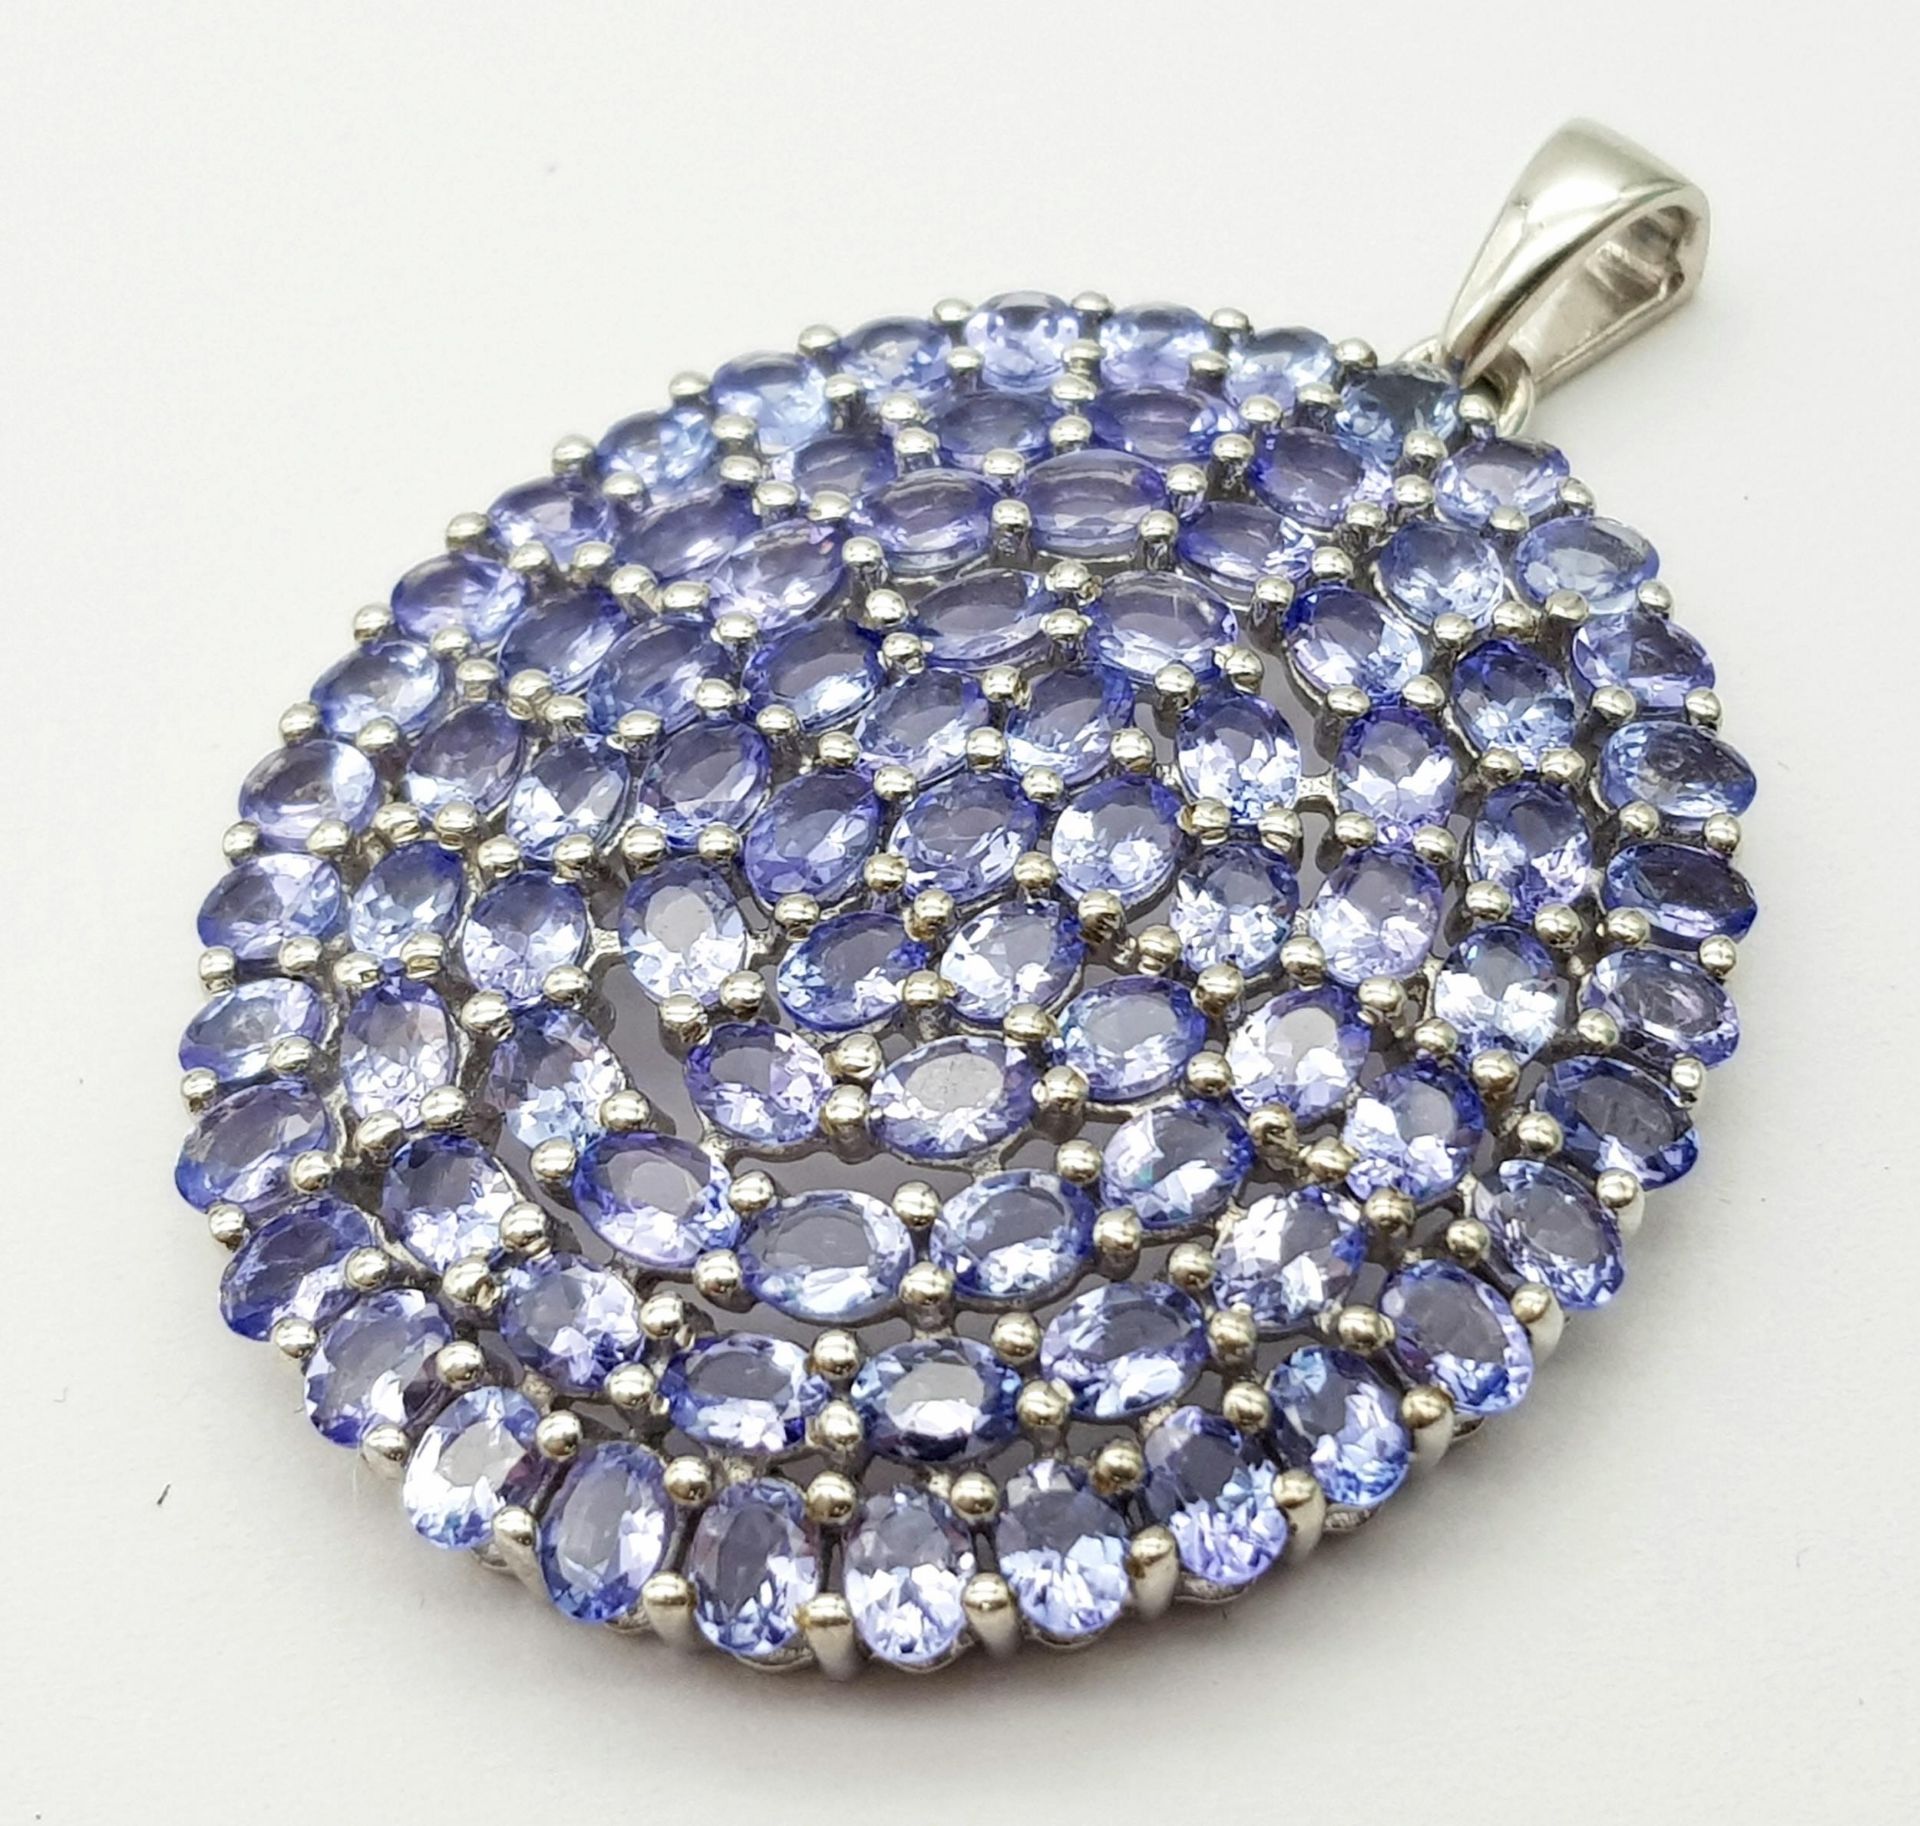 An Unworn, Fully Certified Limited Edition (1 of 40), Sterling Silver Tanzanite Set Pendant. 4.5cm